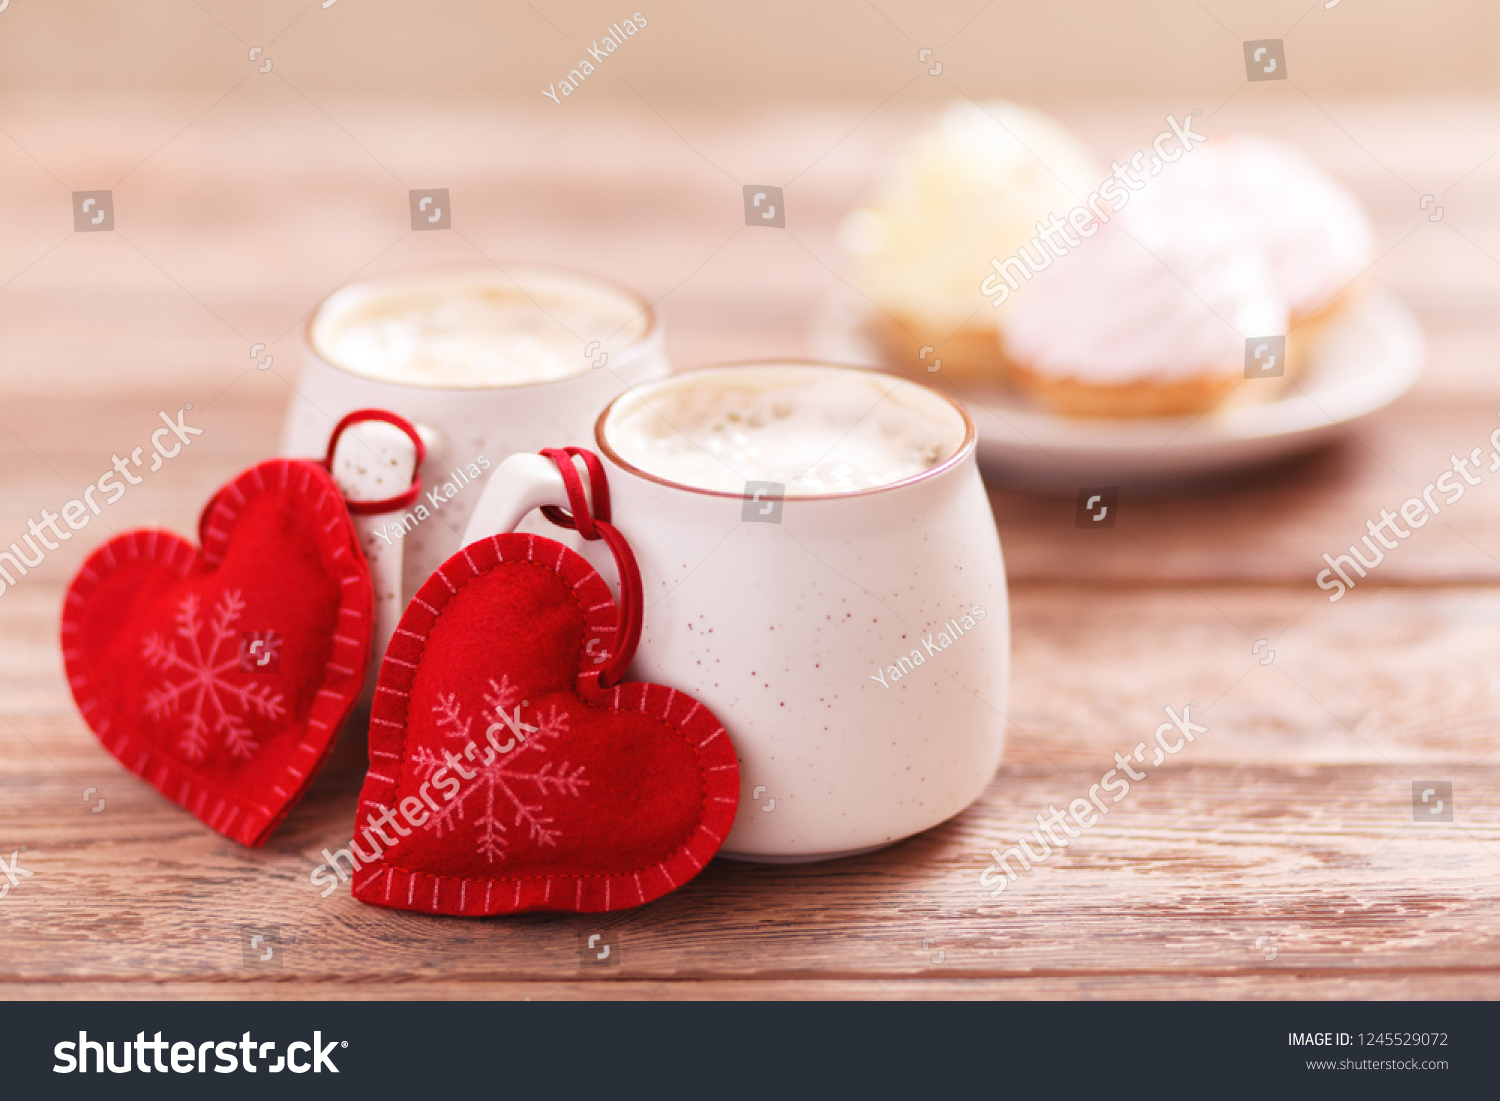 Background romantic mood. Two cups of coffee with decorative felt hearts for Valentine's Day or Birthday, Christmas. Wooden background. Cakes on blurred background. Selective focus, close-up #1245529072